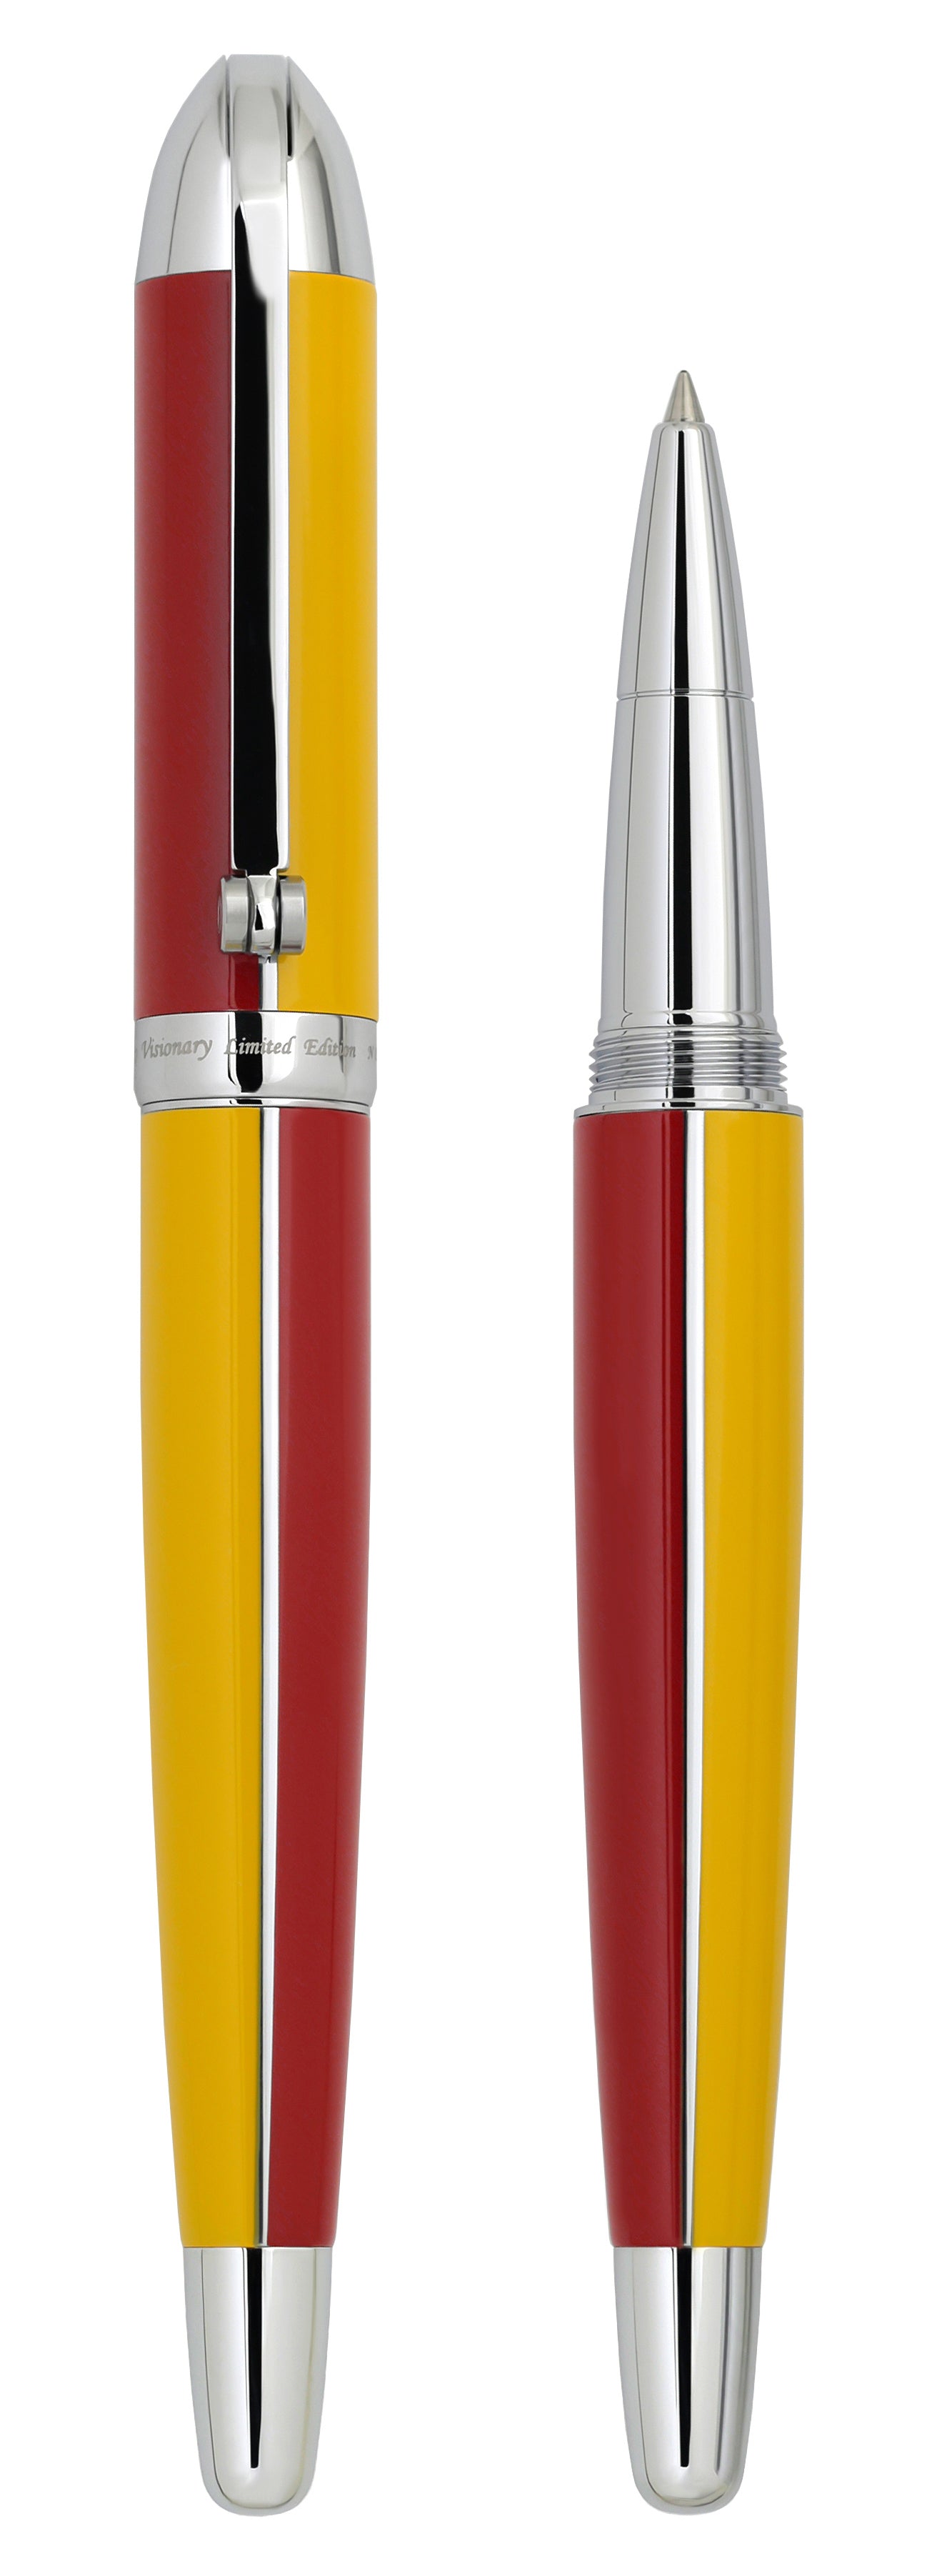 Xezo - Vertical view of two Visionary Aspen/Red R rollerball pens. The pen on the left is capped, and the pen on the right has no cap